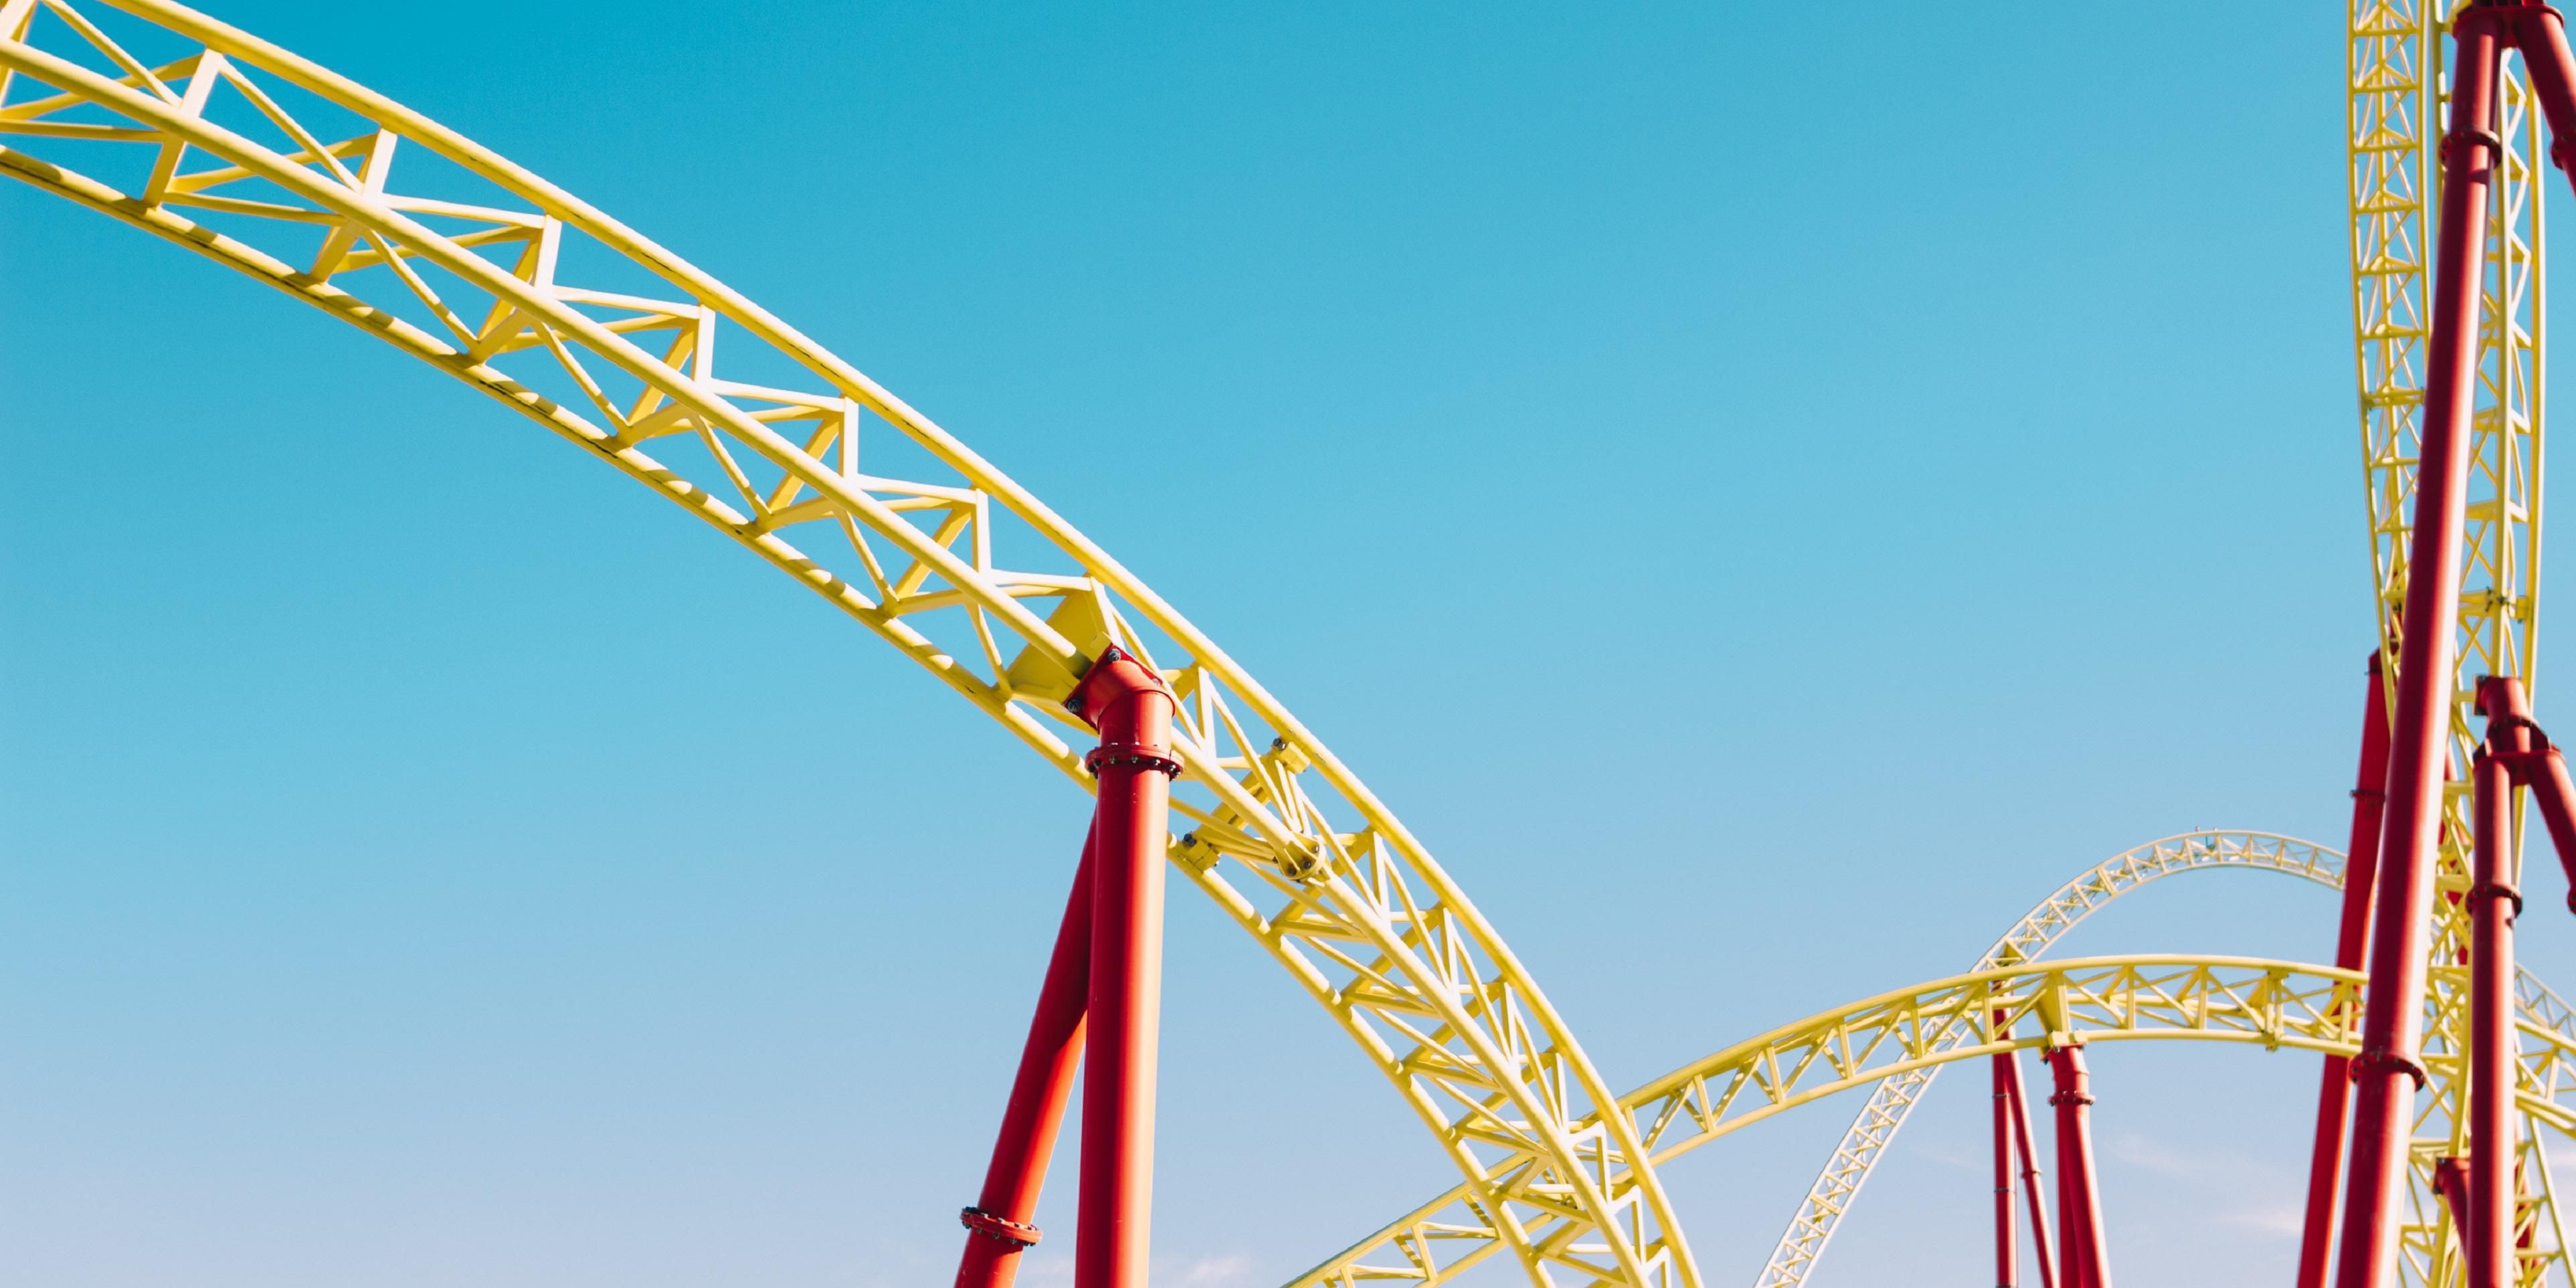 Kennywood Park is located 5 quick miles from our hotel and is a must-see for every generation, offering seven roller coasters and packed with family fun! Offering attractions you won't find anywhere else, discover the best amusement and adventure park in Pennsylvania! 